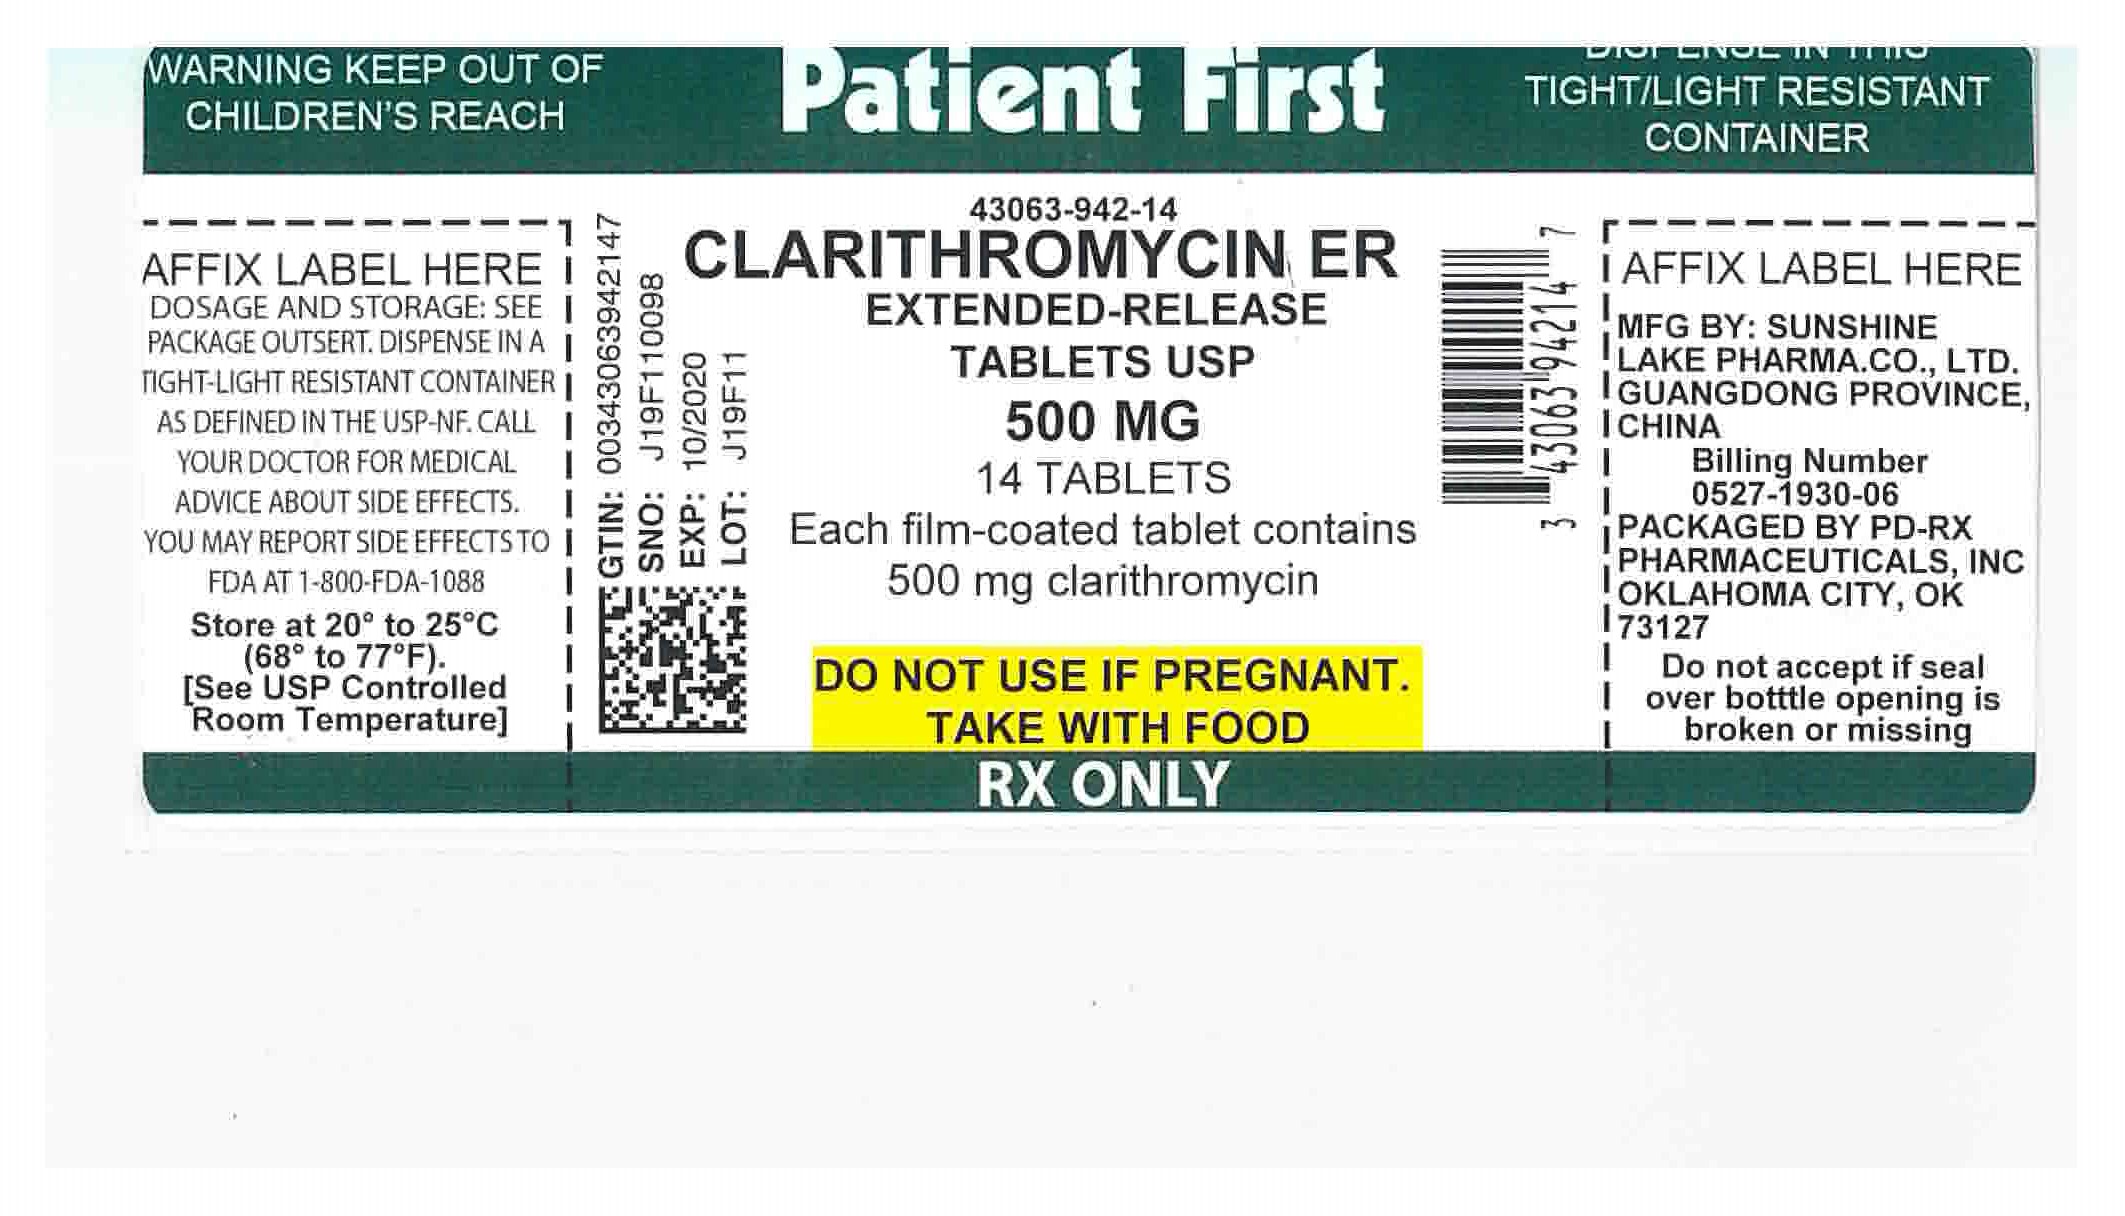 Clarithromycin Extended-release Tablets USP, 500 mg